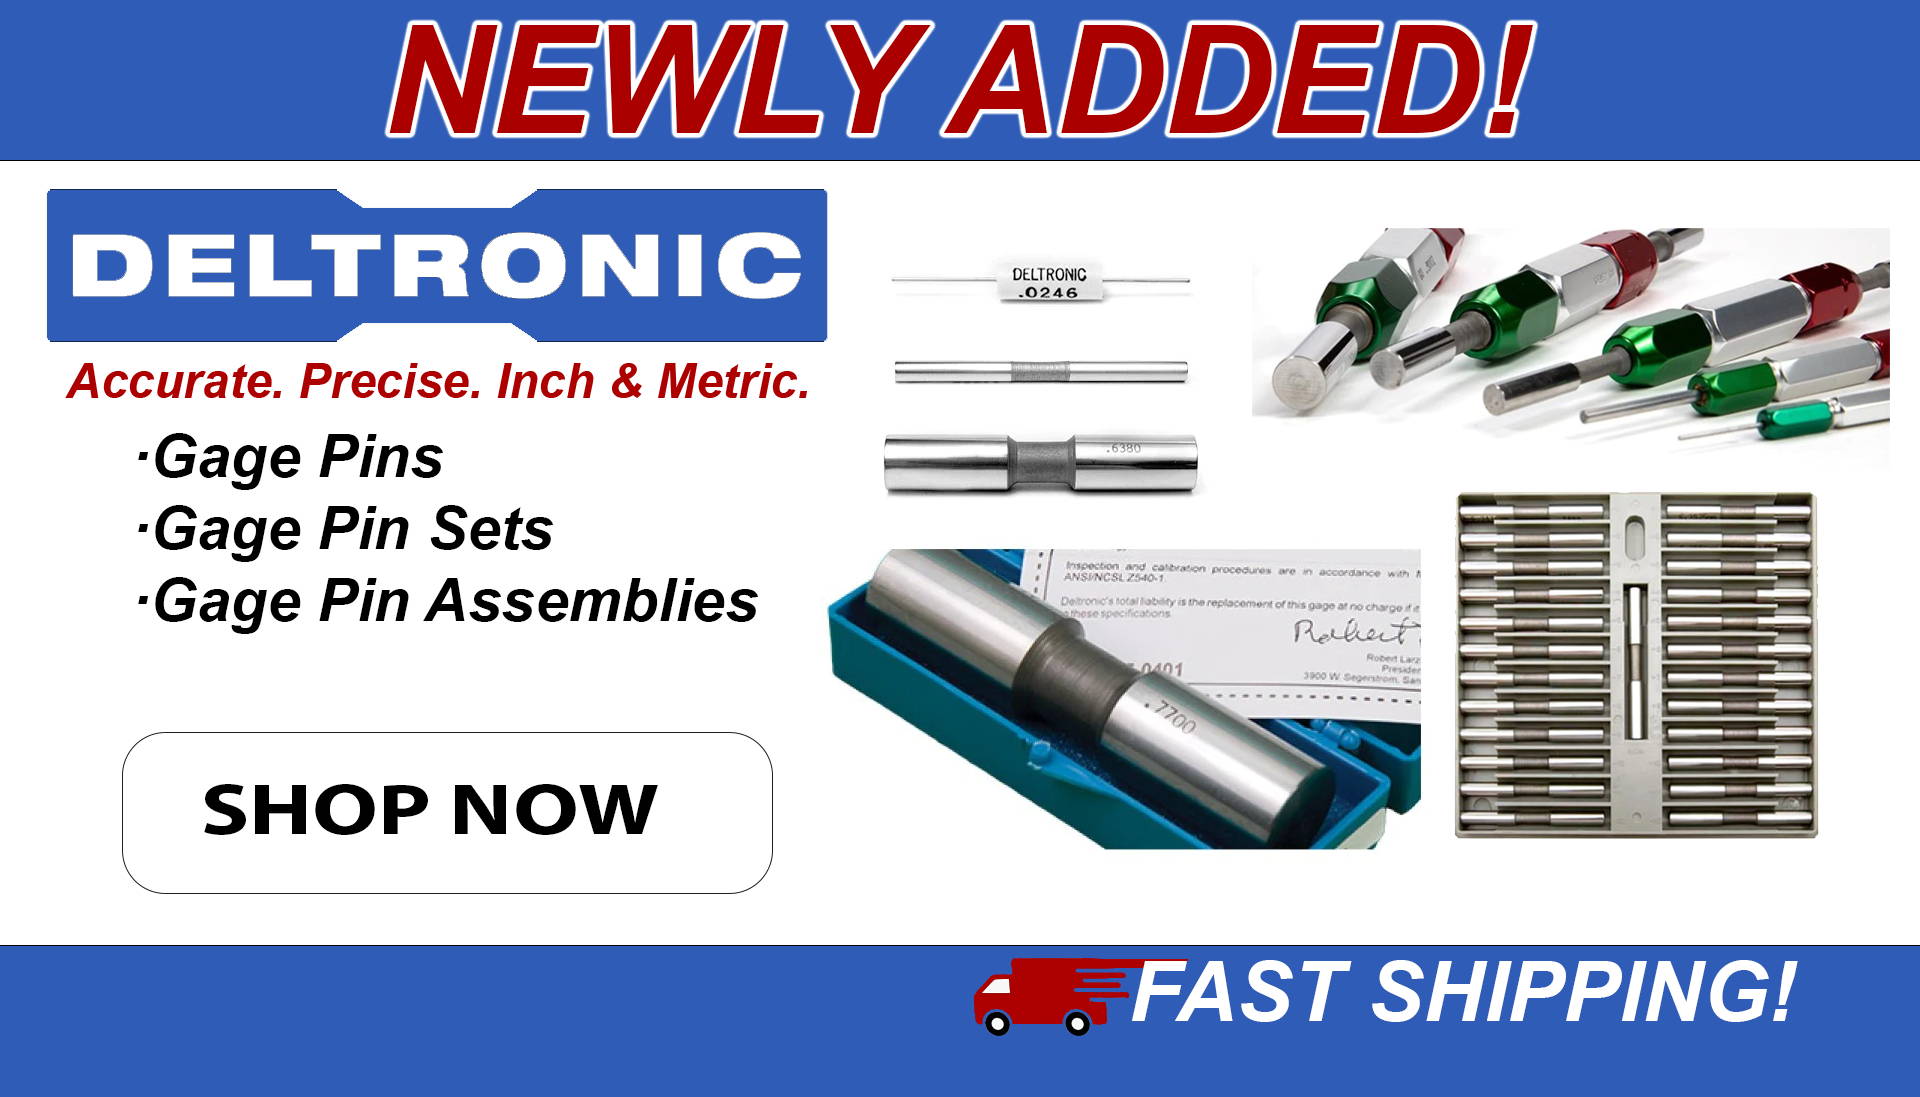 Shop Our New Delronic Pin Gage Collection at GreatGages.com 